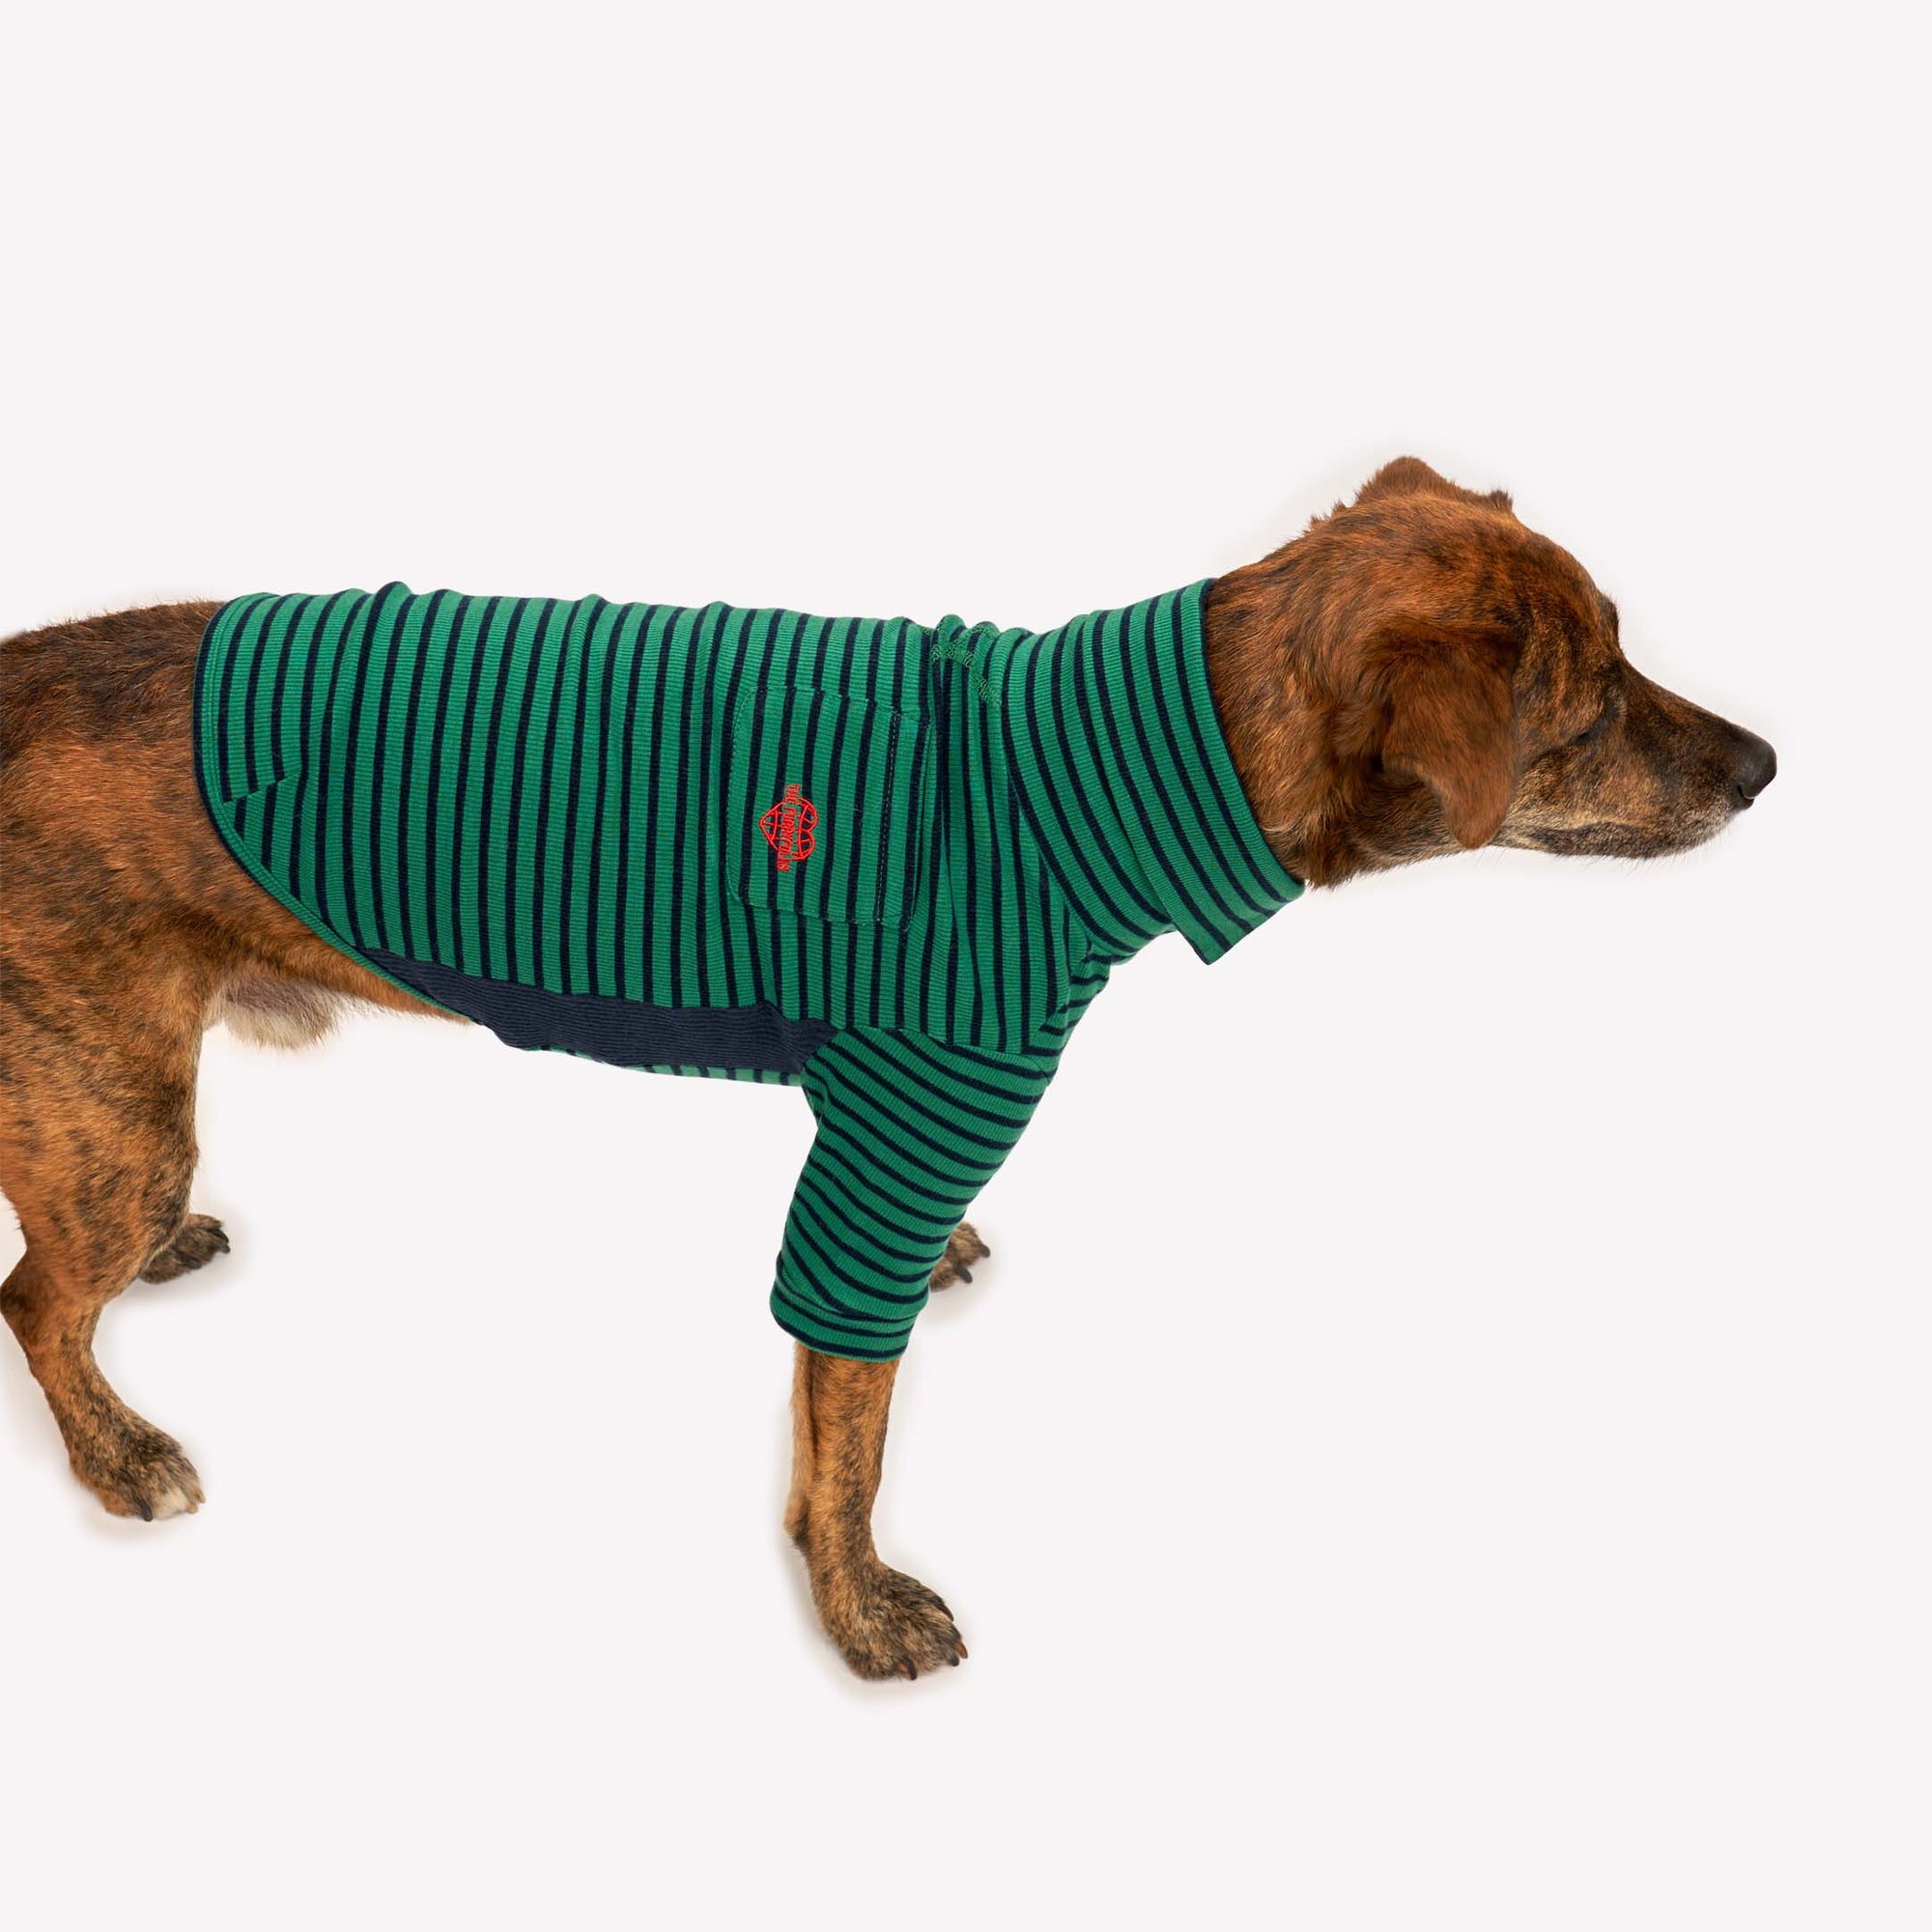 Side view of a brindle dog wearing a green striped shirt, complete with an embroidered logo, for a fashionable look.